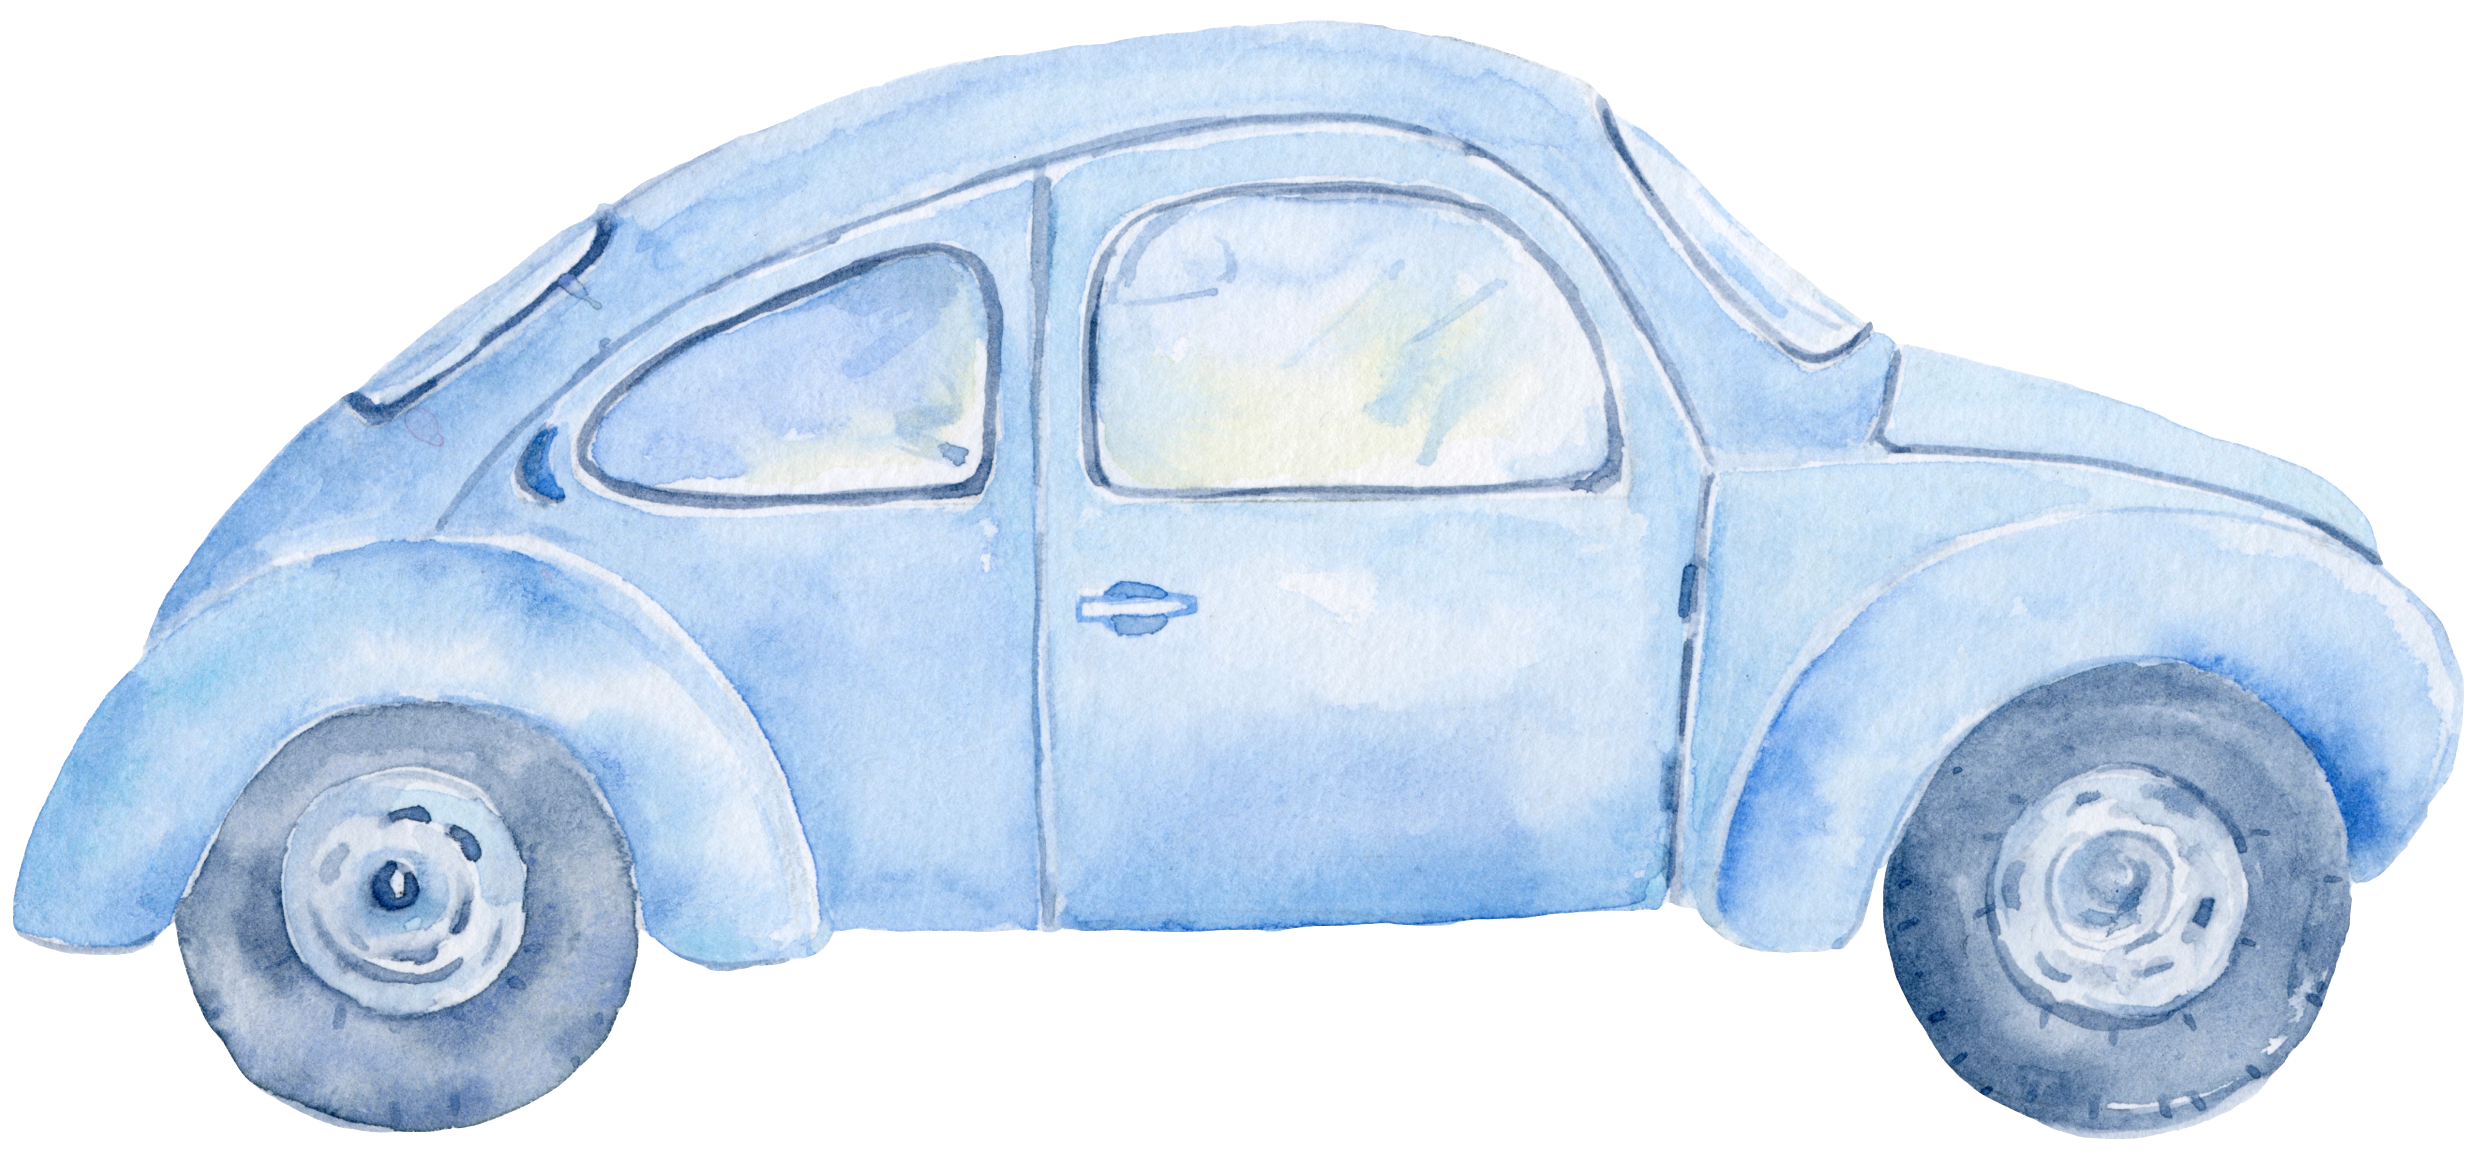 Watercolor Car Painting Vintage Free Download PNG HD Clipart